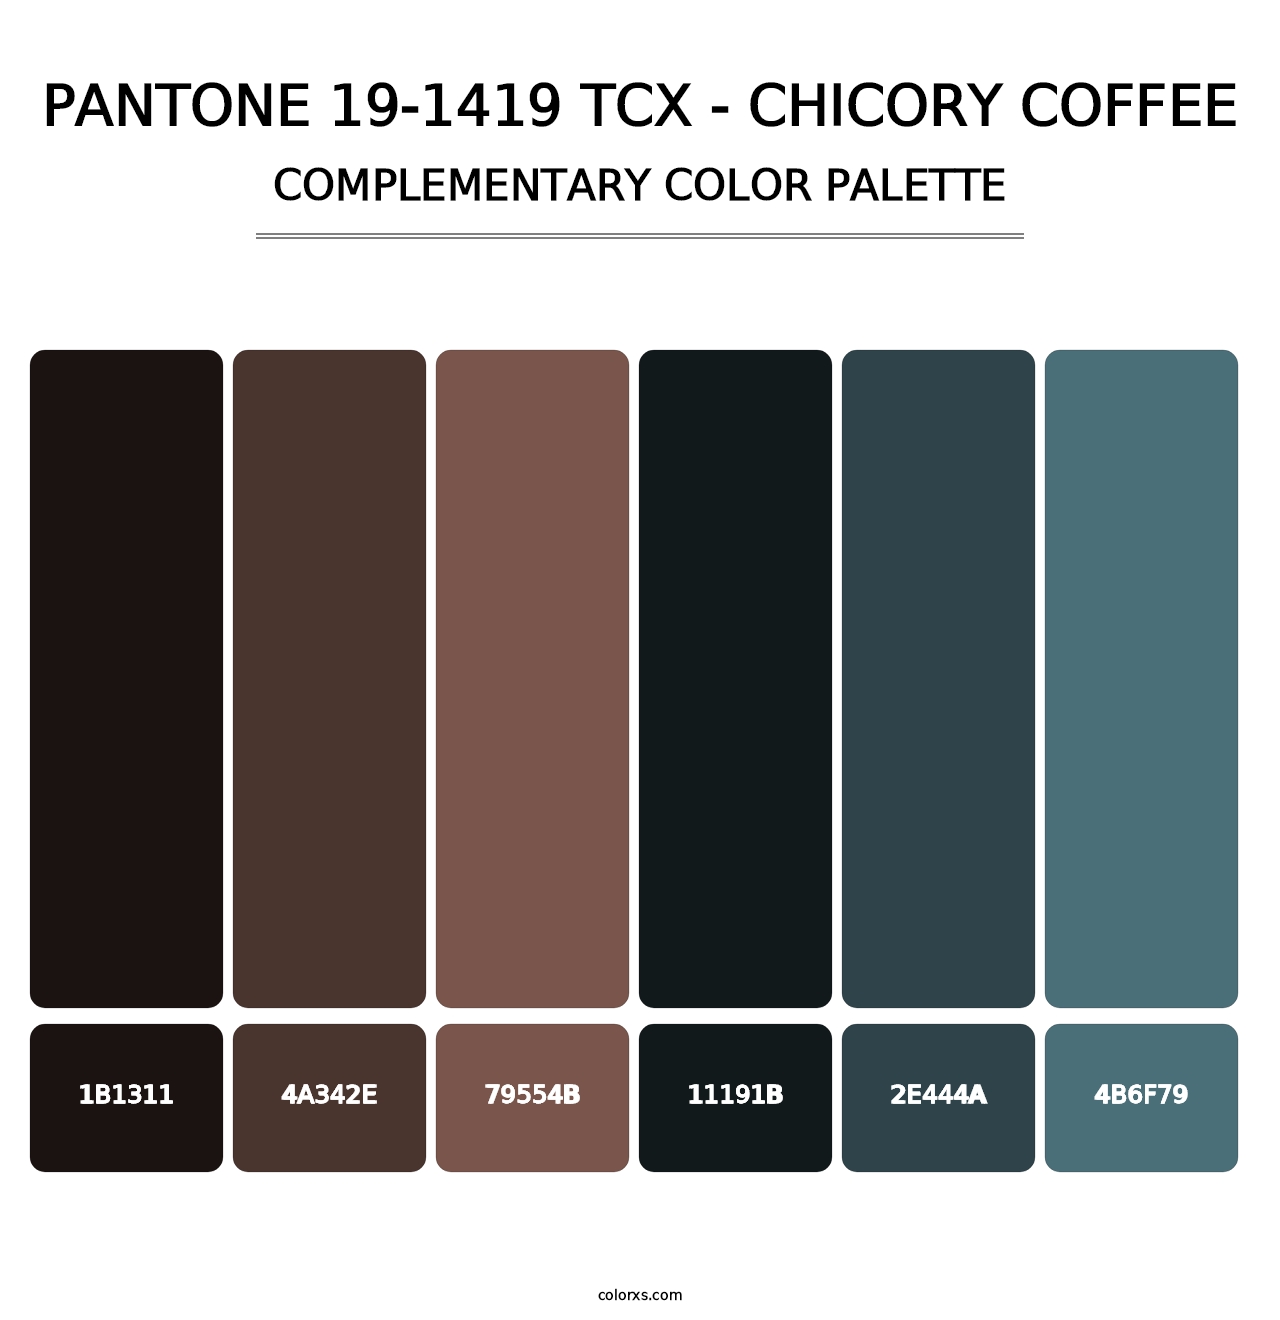 PANTONE 19-1419 TCX - Chicory Coffee - Complementary Color Palette